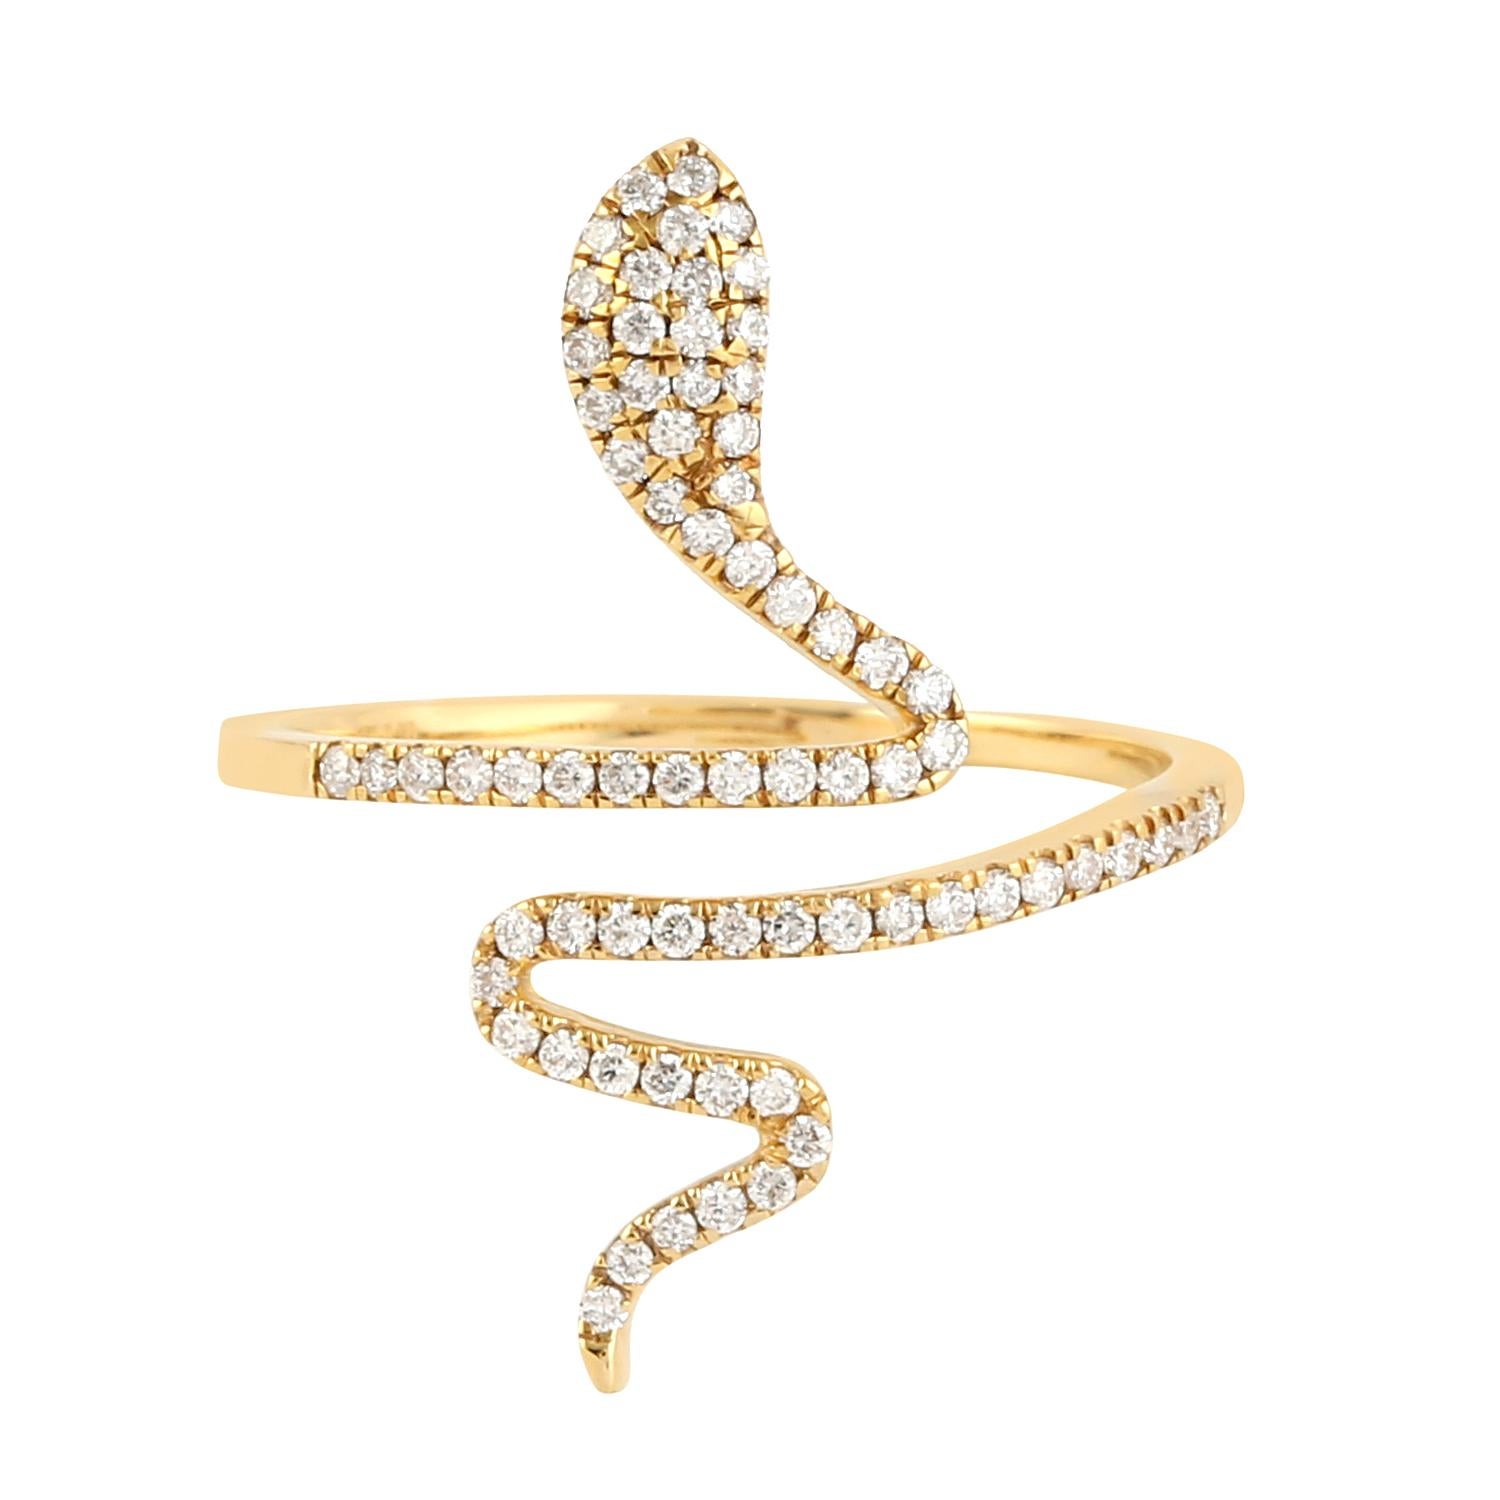 Art Nouveau Snake Shaped Ring With Pave Diamonds Made In 18k Yellow Gold For Sale